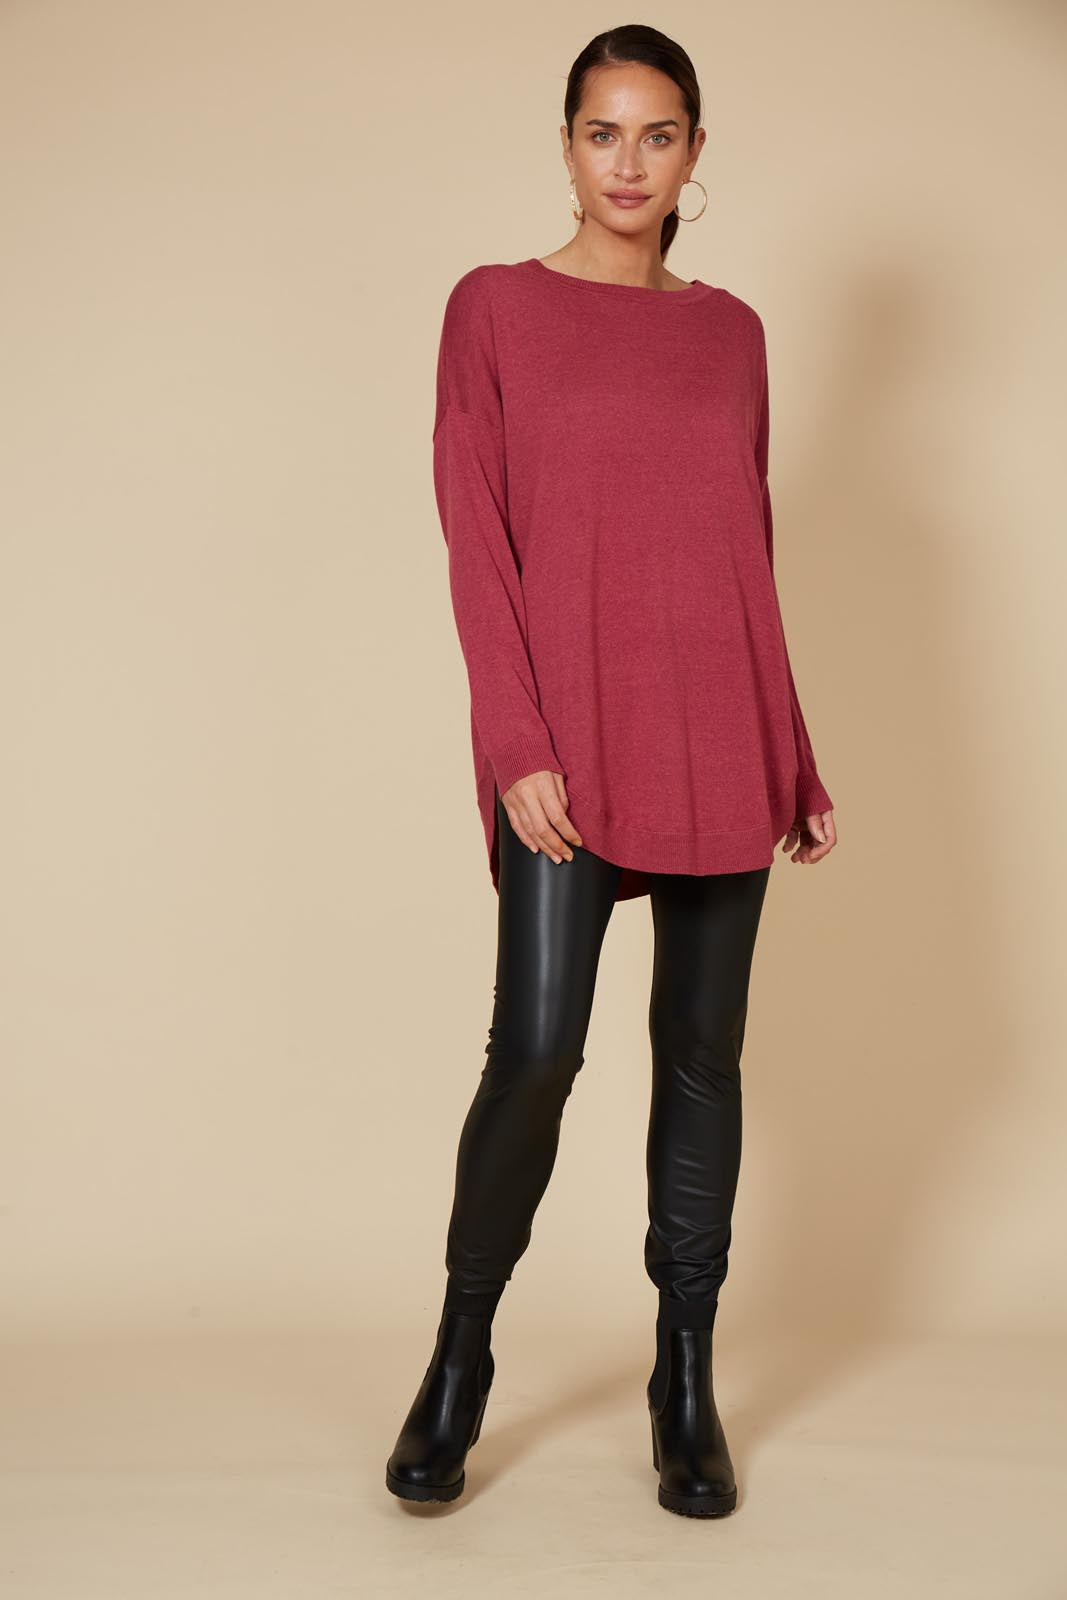 Cleo Jumper - Mulberry - eb&ive Clothing - Knit Jumper One Size